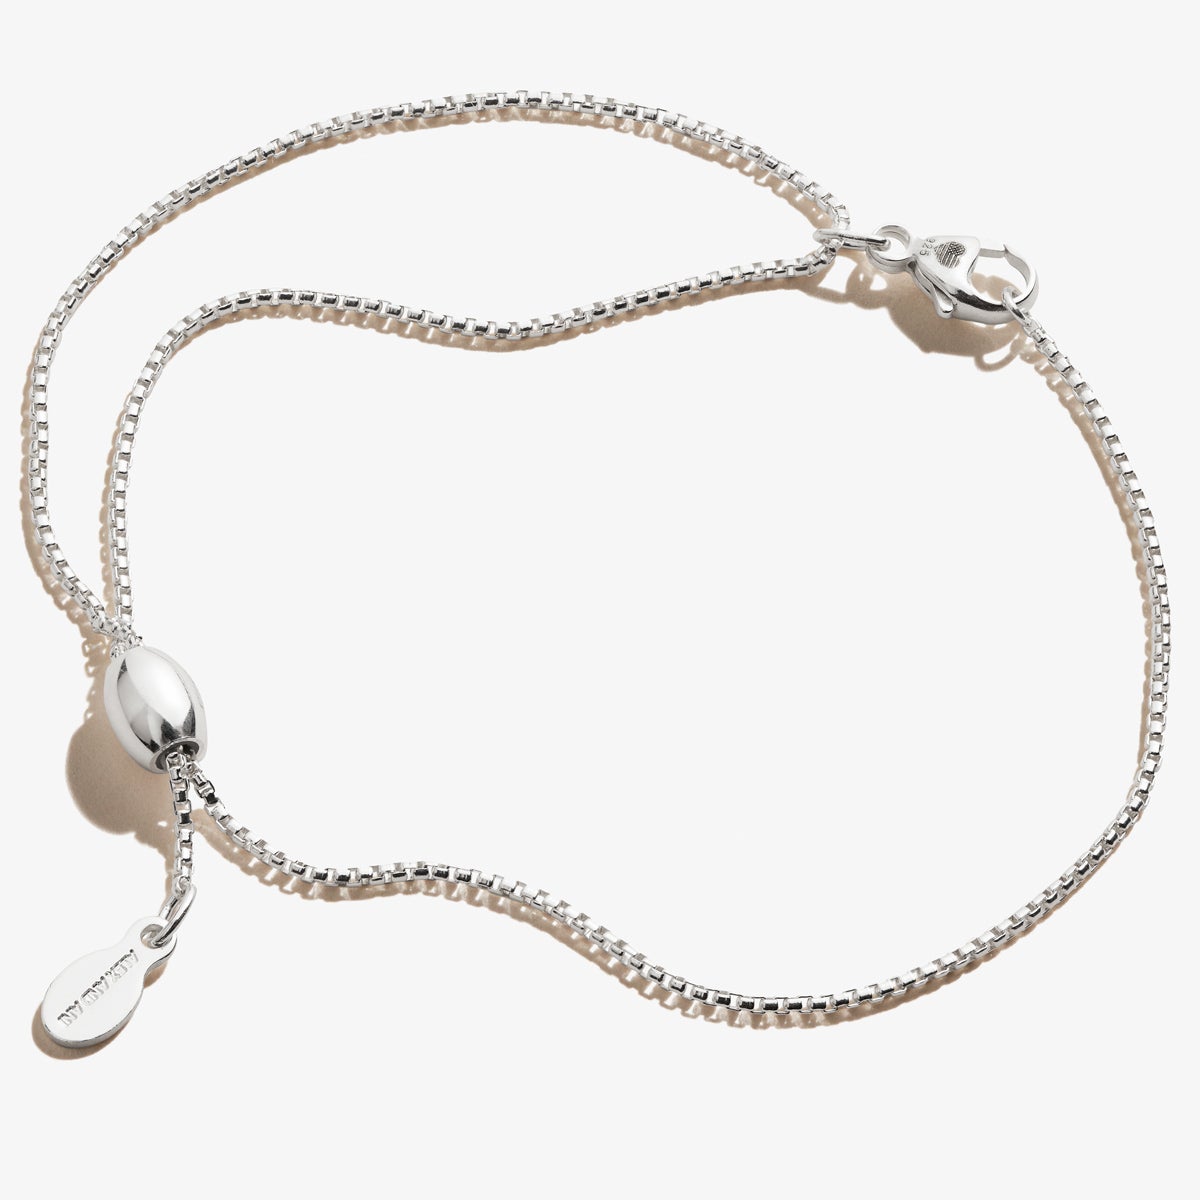 Pull Chain Clasp Bracelet - Alex and Ani